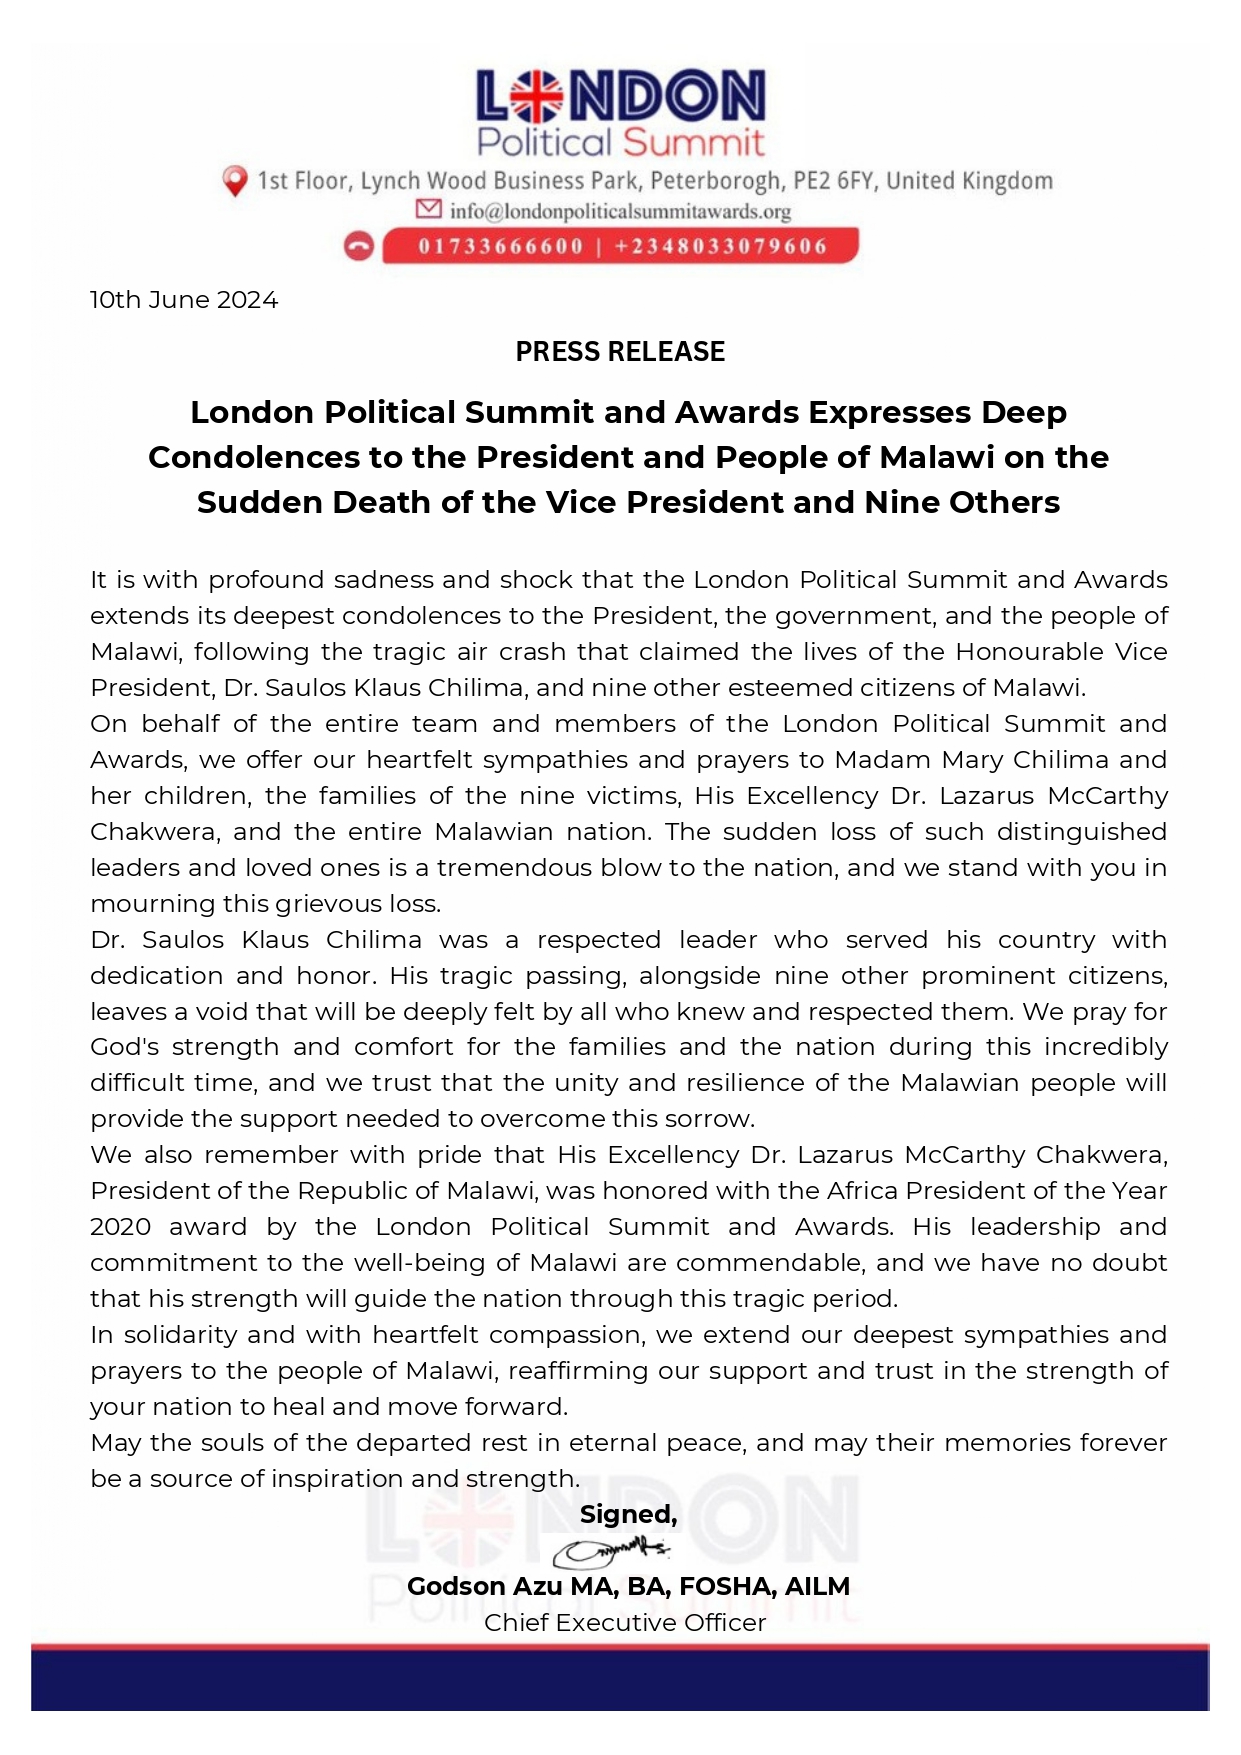 London Political Summit and Awards Expresses Deep Condolences to the President and People of Malawi on the Sudden Death of the Vice President and Nine Others